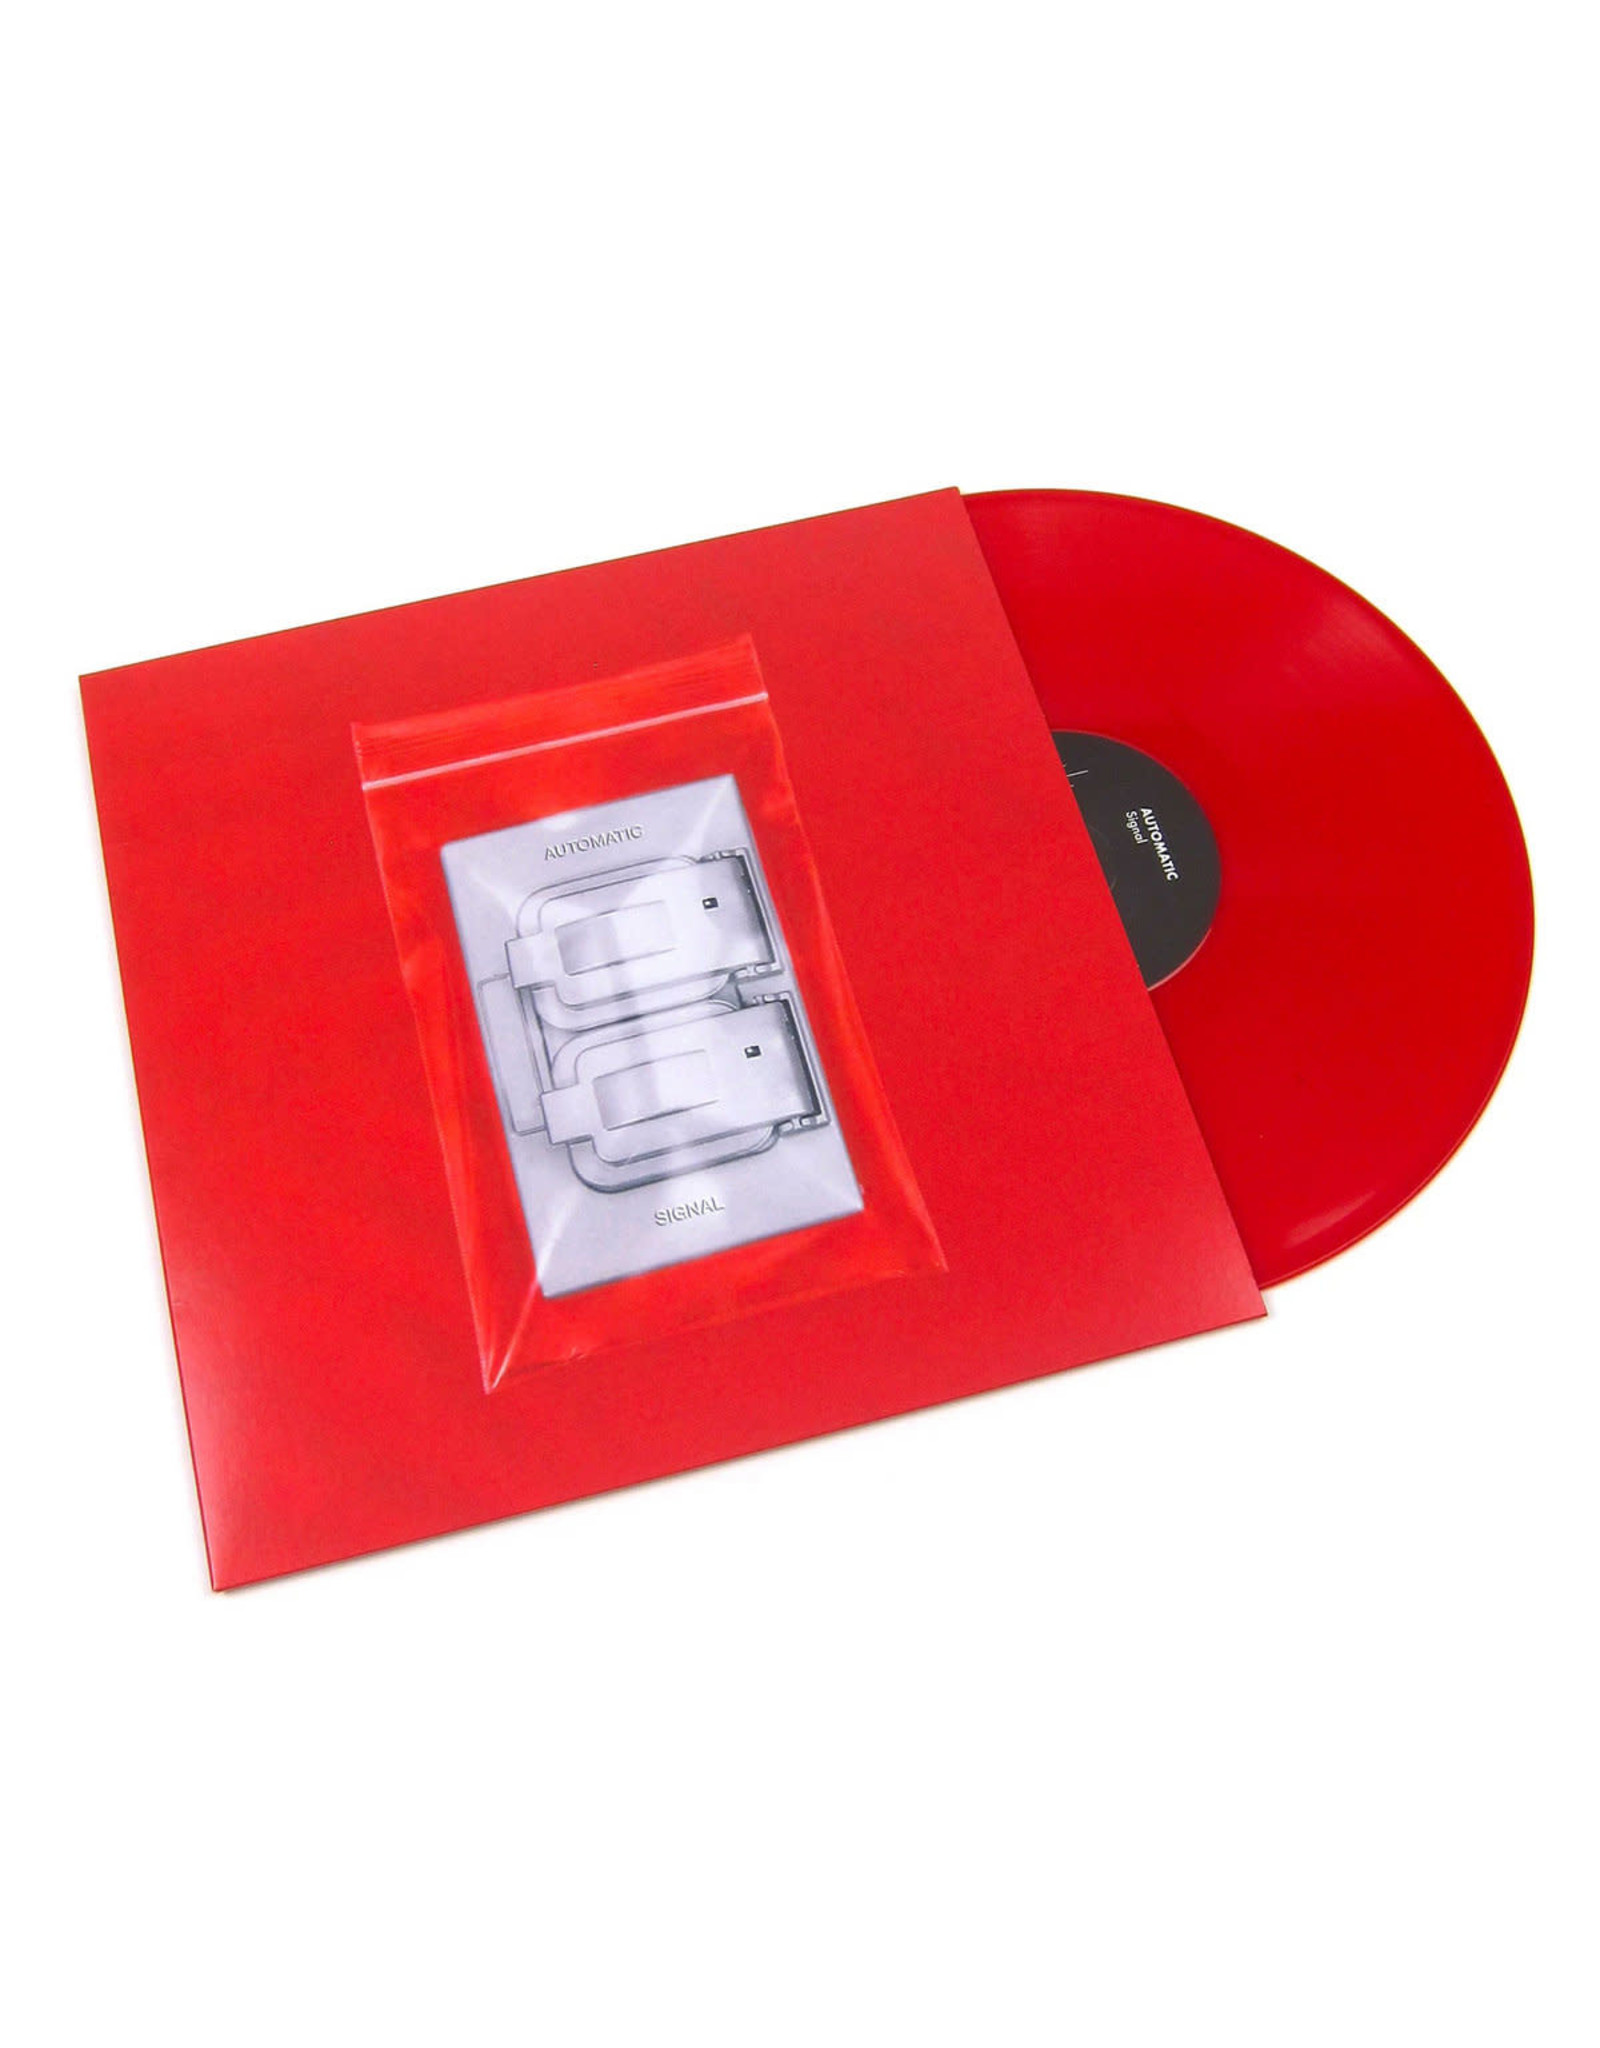 Automatic - Signal (Exclusive Red Vinyl)